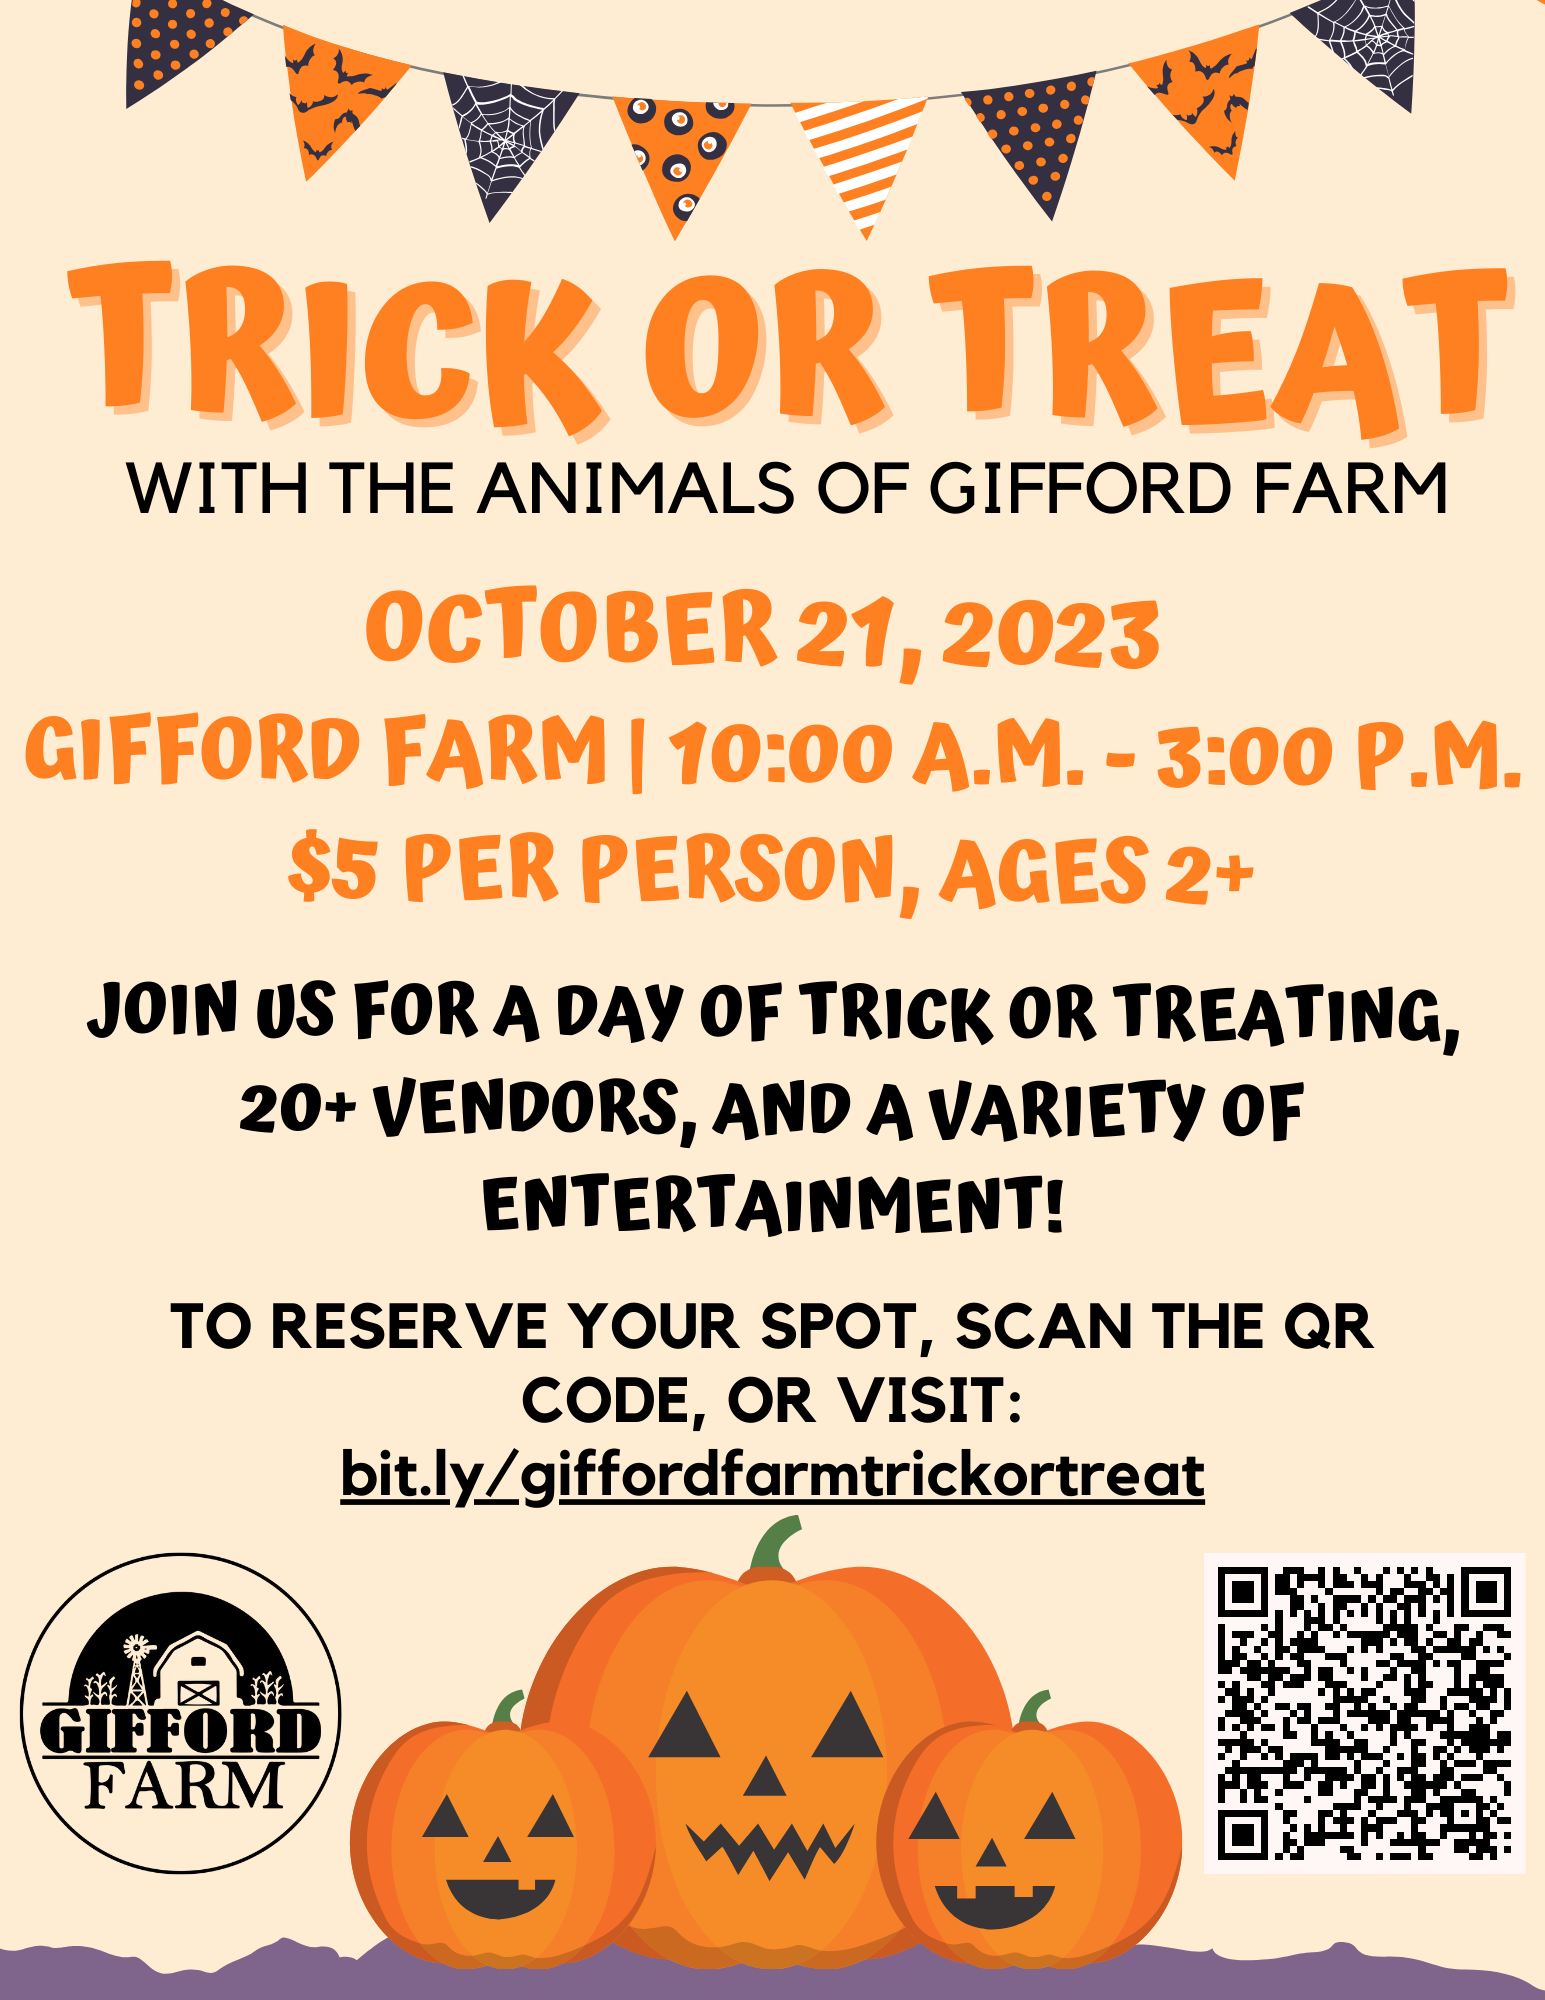 Trick or Treat
With the Animals of Gifford Farm
Saturday, October 21, 2023 
10 AM to 3 PM
Event by Reservation only!
Admission: $5 each Adults and Trick or Treaters
Kids under 2 years (not Trick or Treating) are free
Make your reservations to bring out your ghouls, goblins, princesses, and superheroes for a day of safe and fun trick for treating!